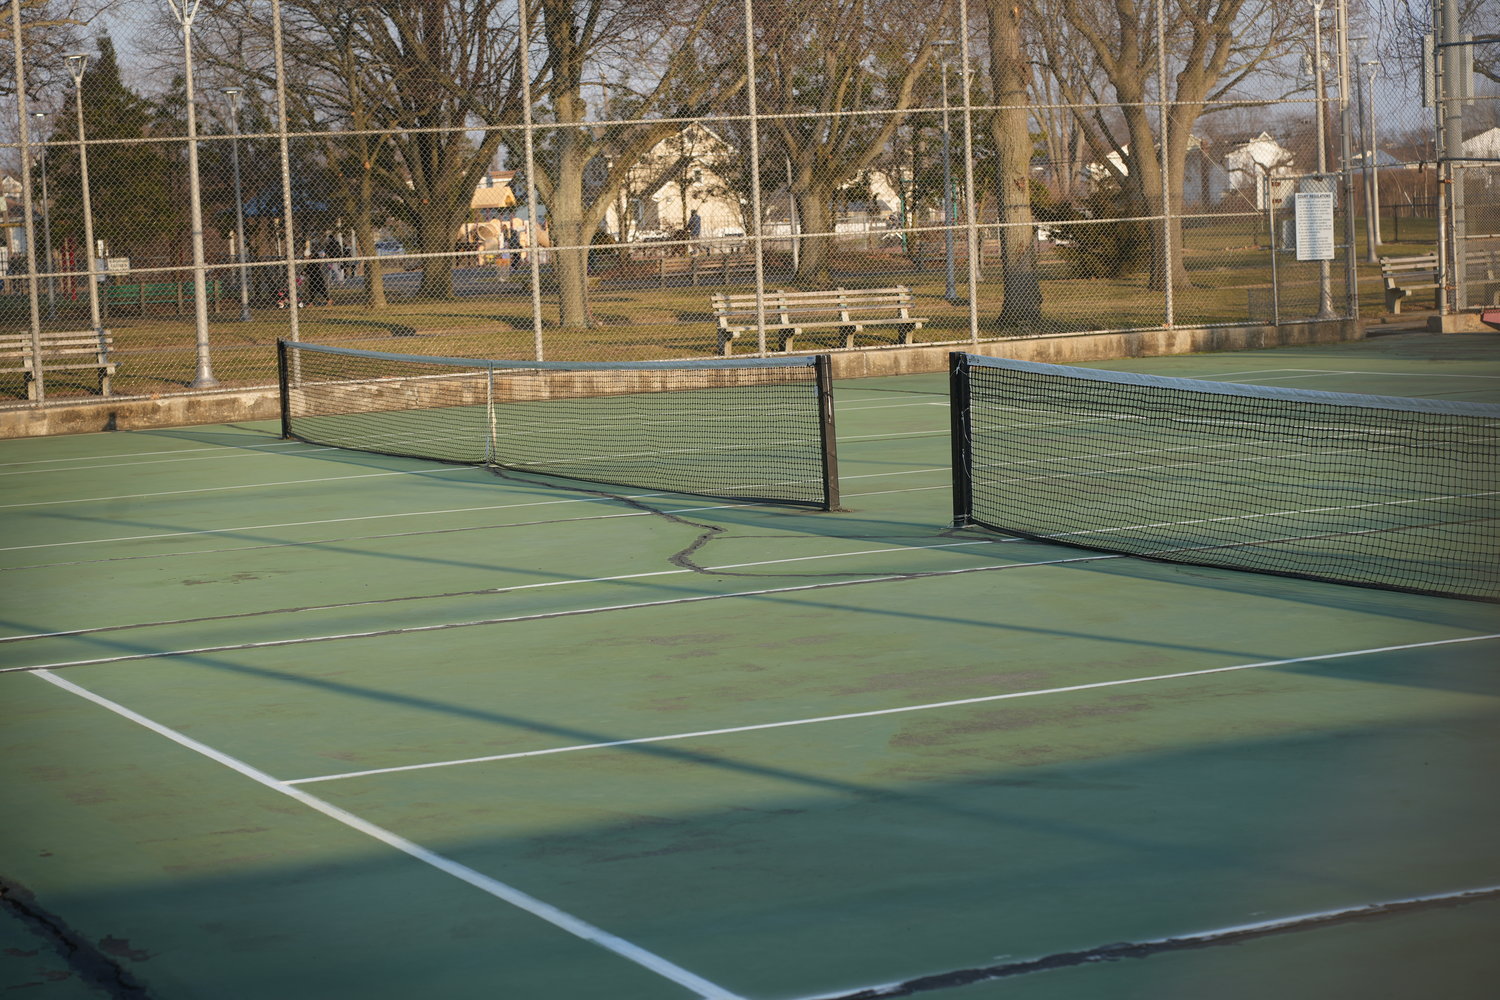 The tennis courts are set to be renovated, and pickleball courts will be installed.